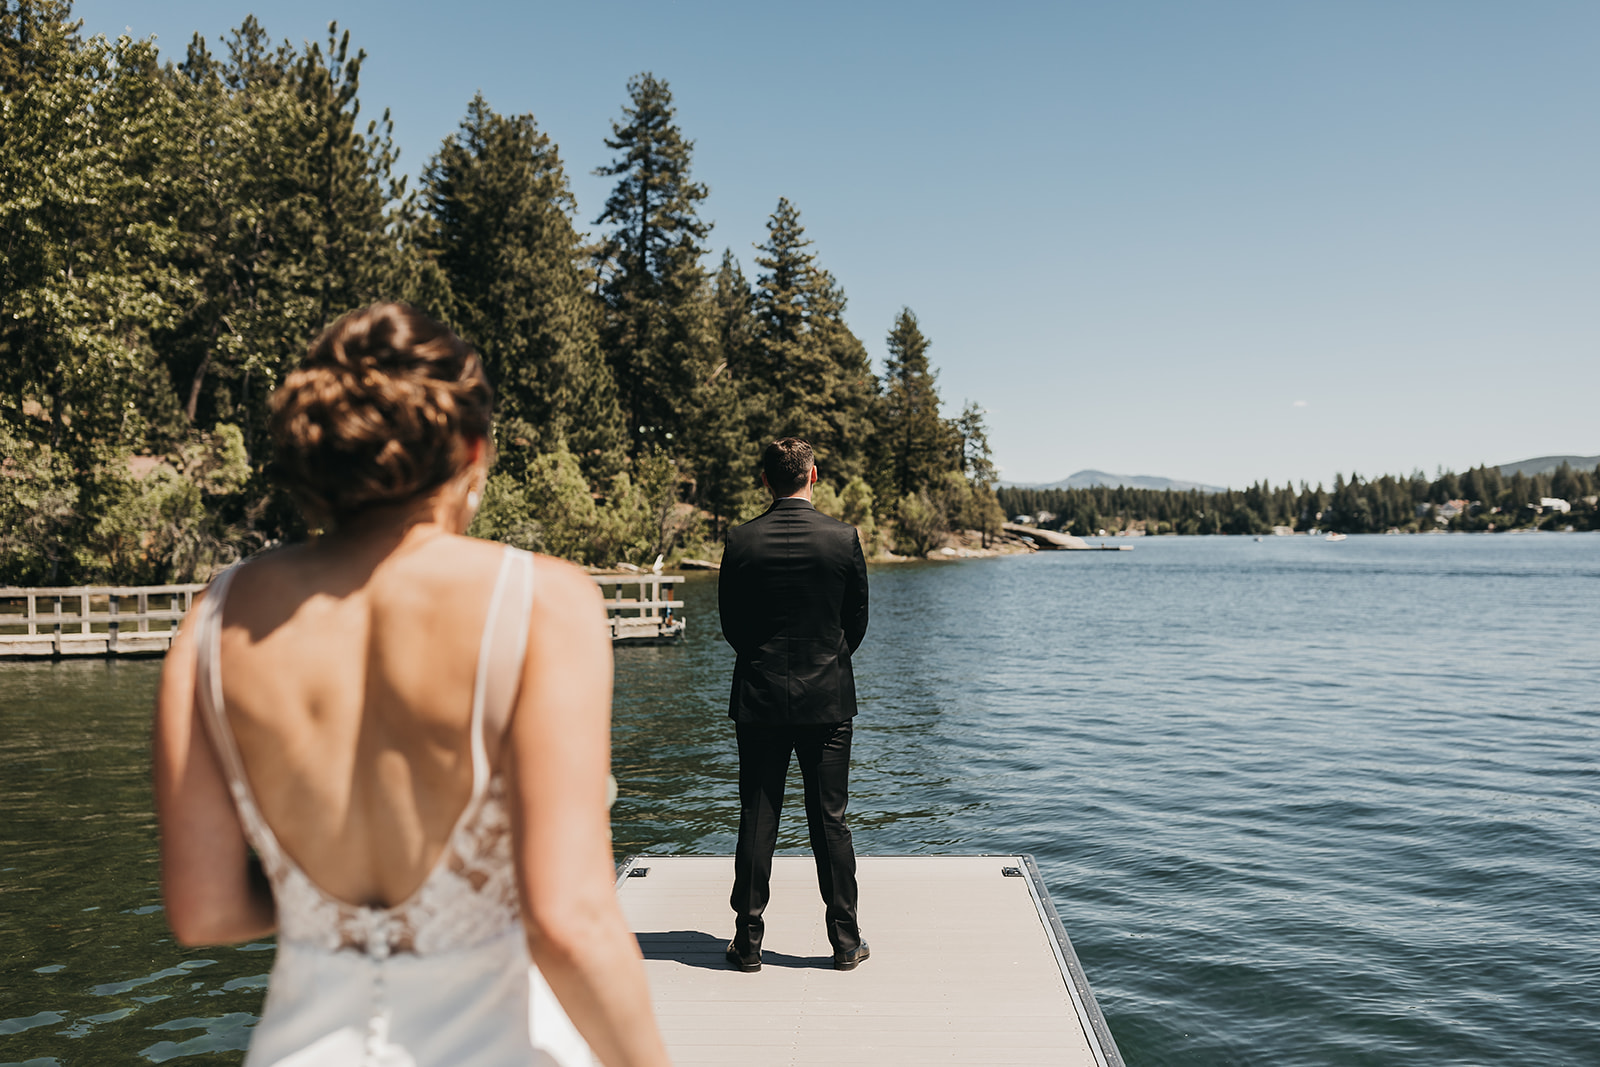 Bride walking up to groom on private dock for first look before the wedding ceremony on lake front property.